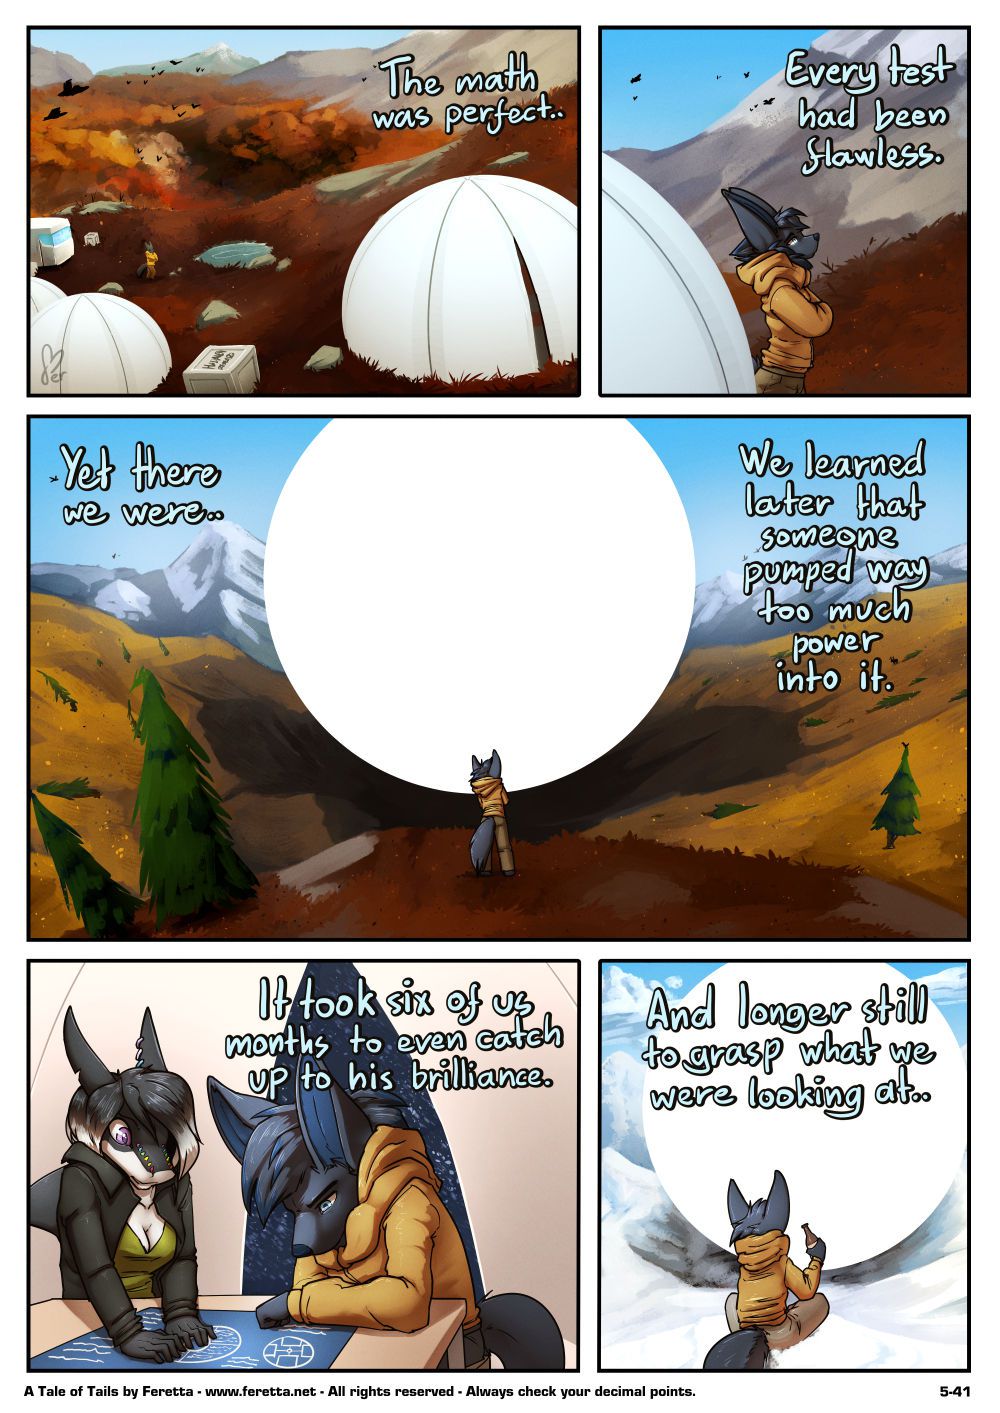 [Feretta] A Tale of Tails: Chapter 5 - A World of Hurt (ongoing) 41